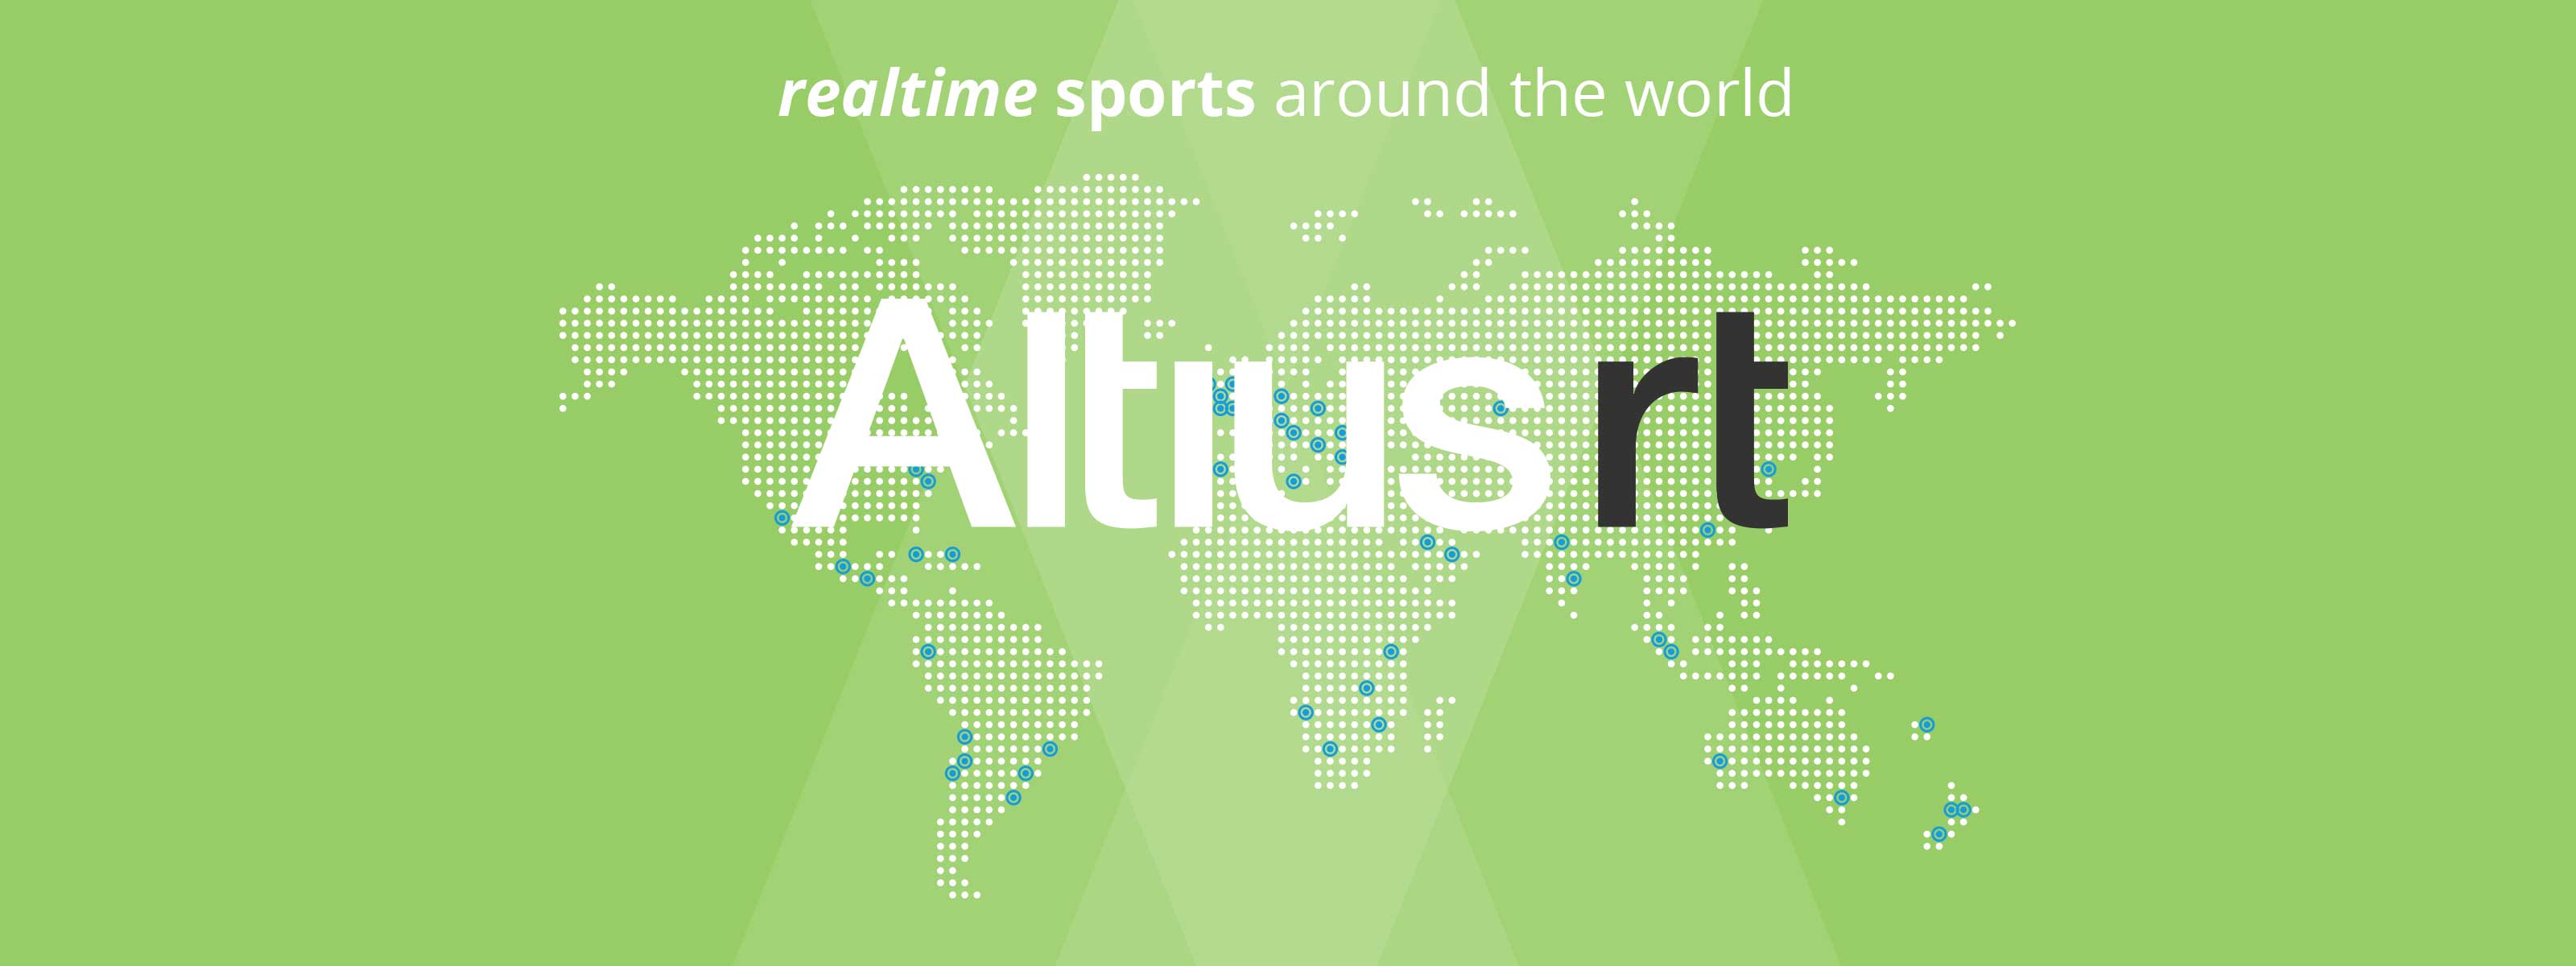 realtime sports around the world